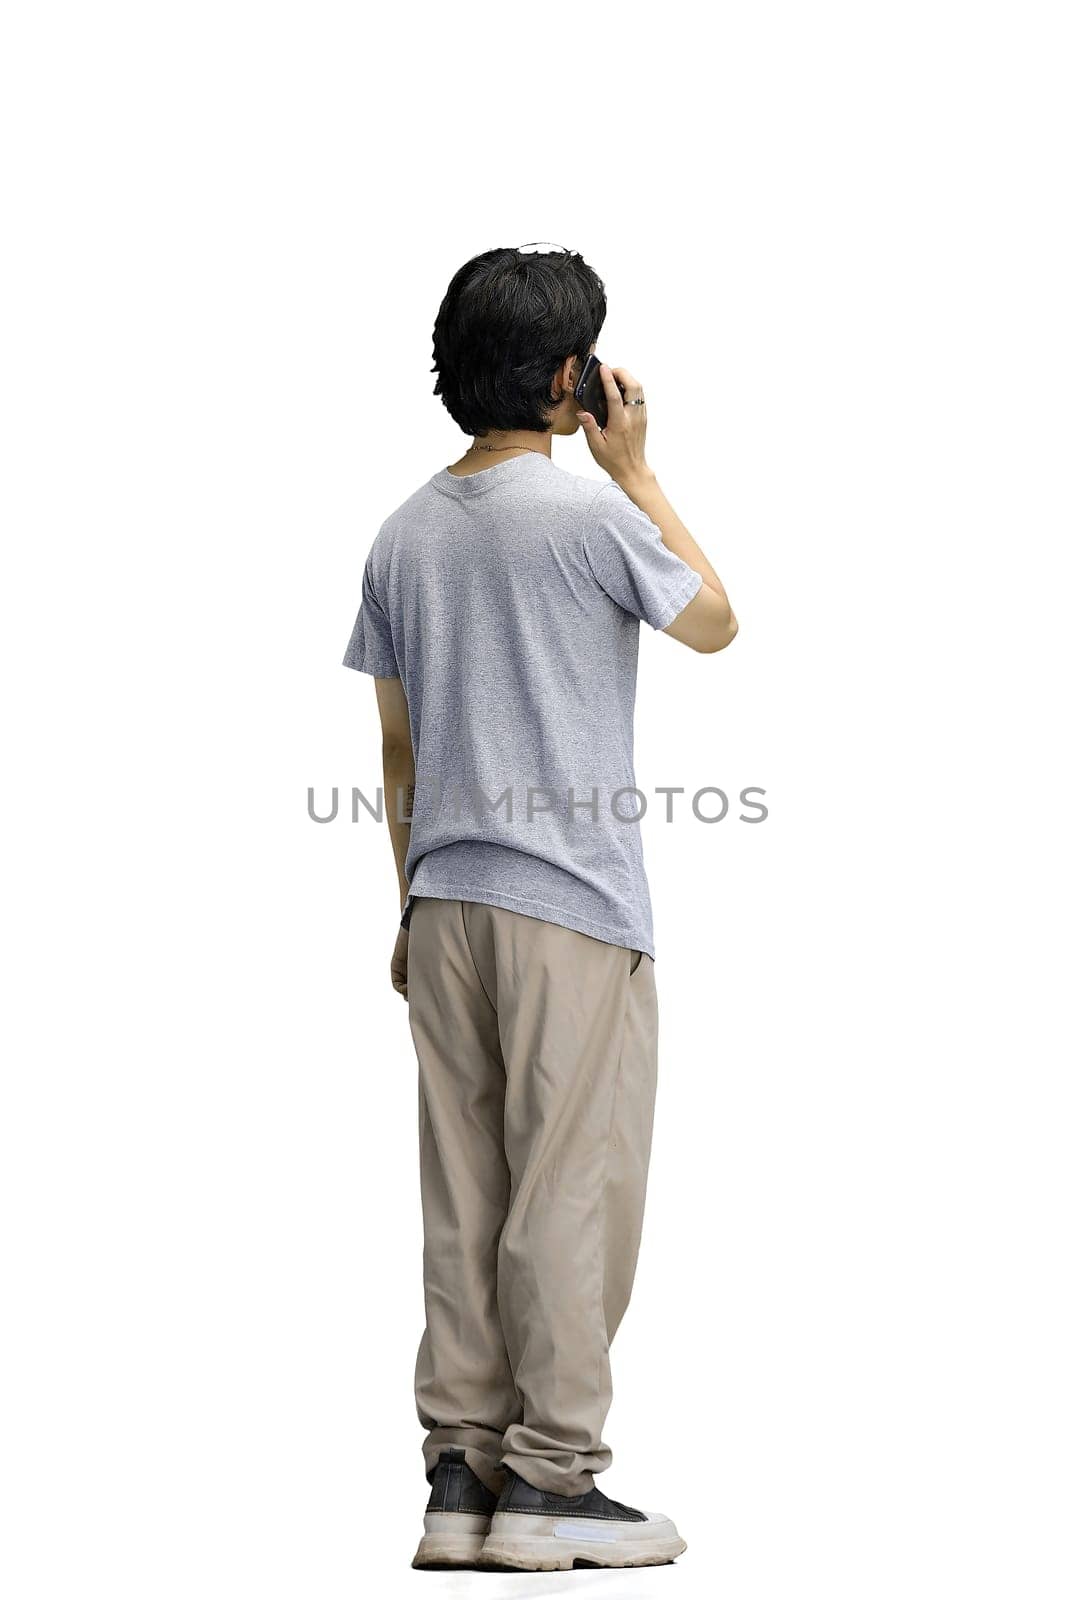 A guy in a gray T-shirt, on a white background, full-length, talking on the phone.